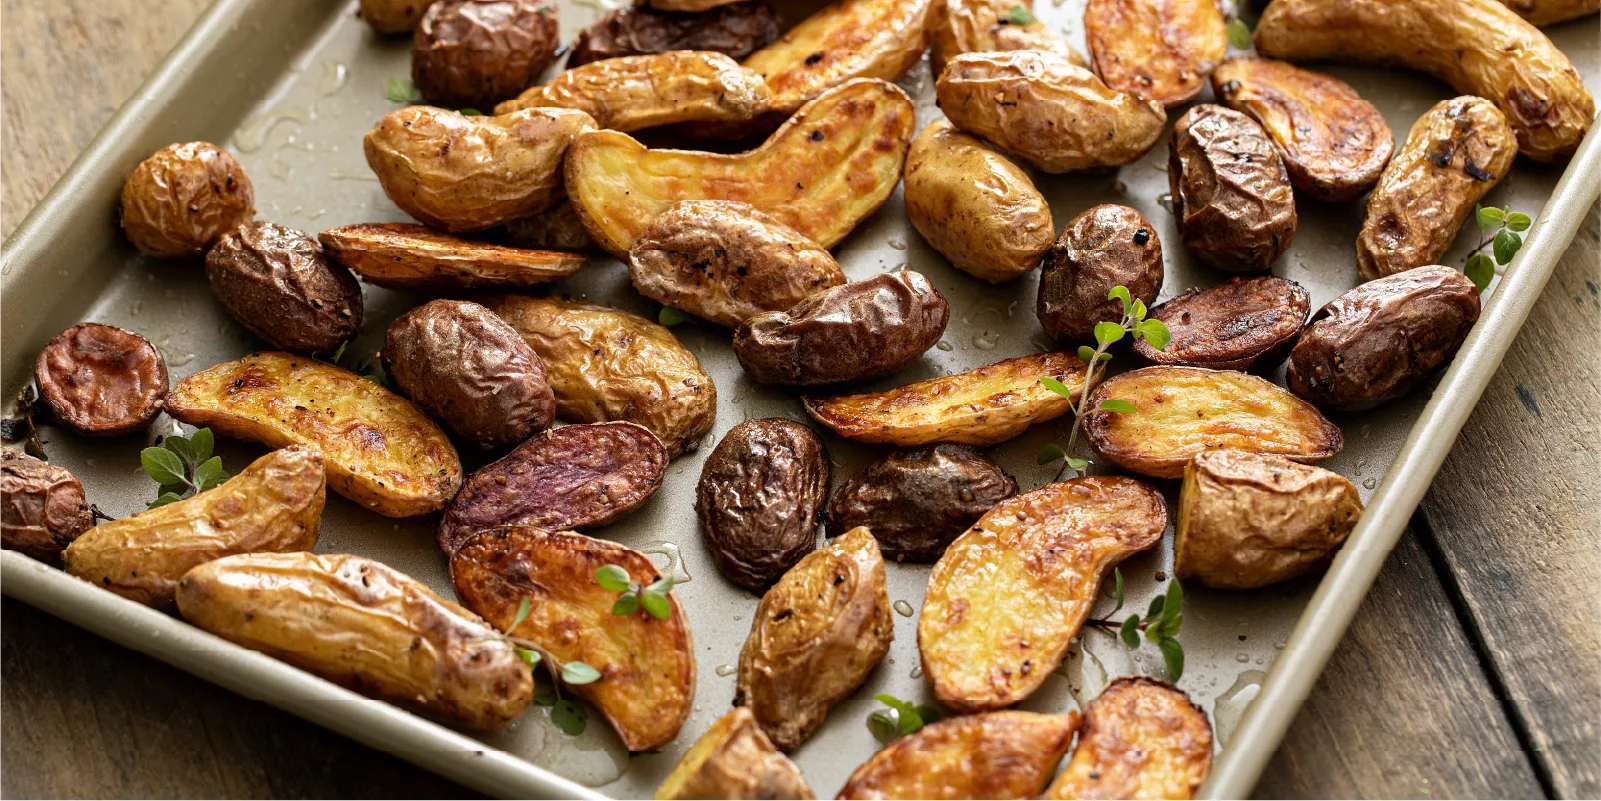 A roasting tray of fingerling fries.